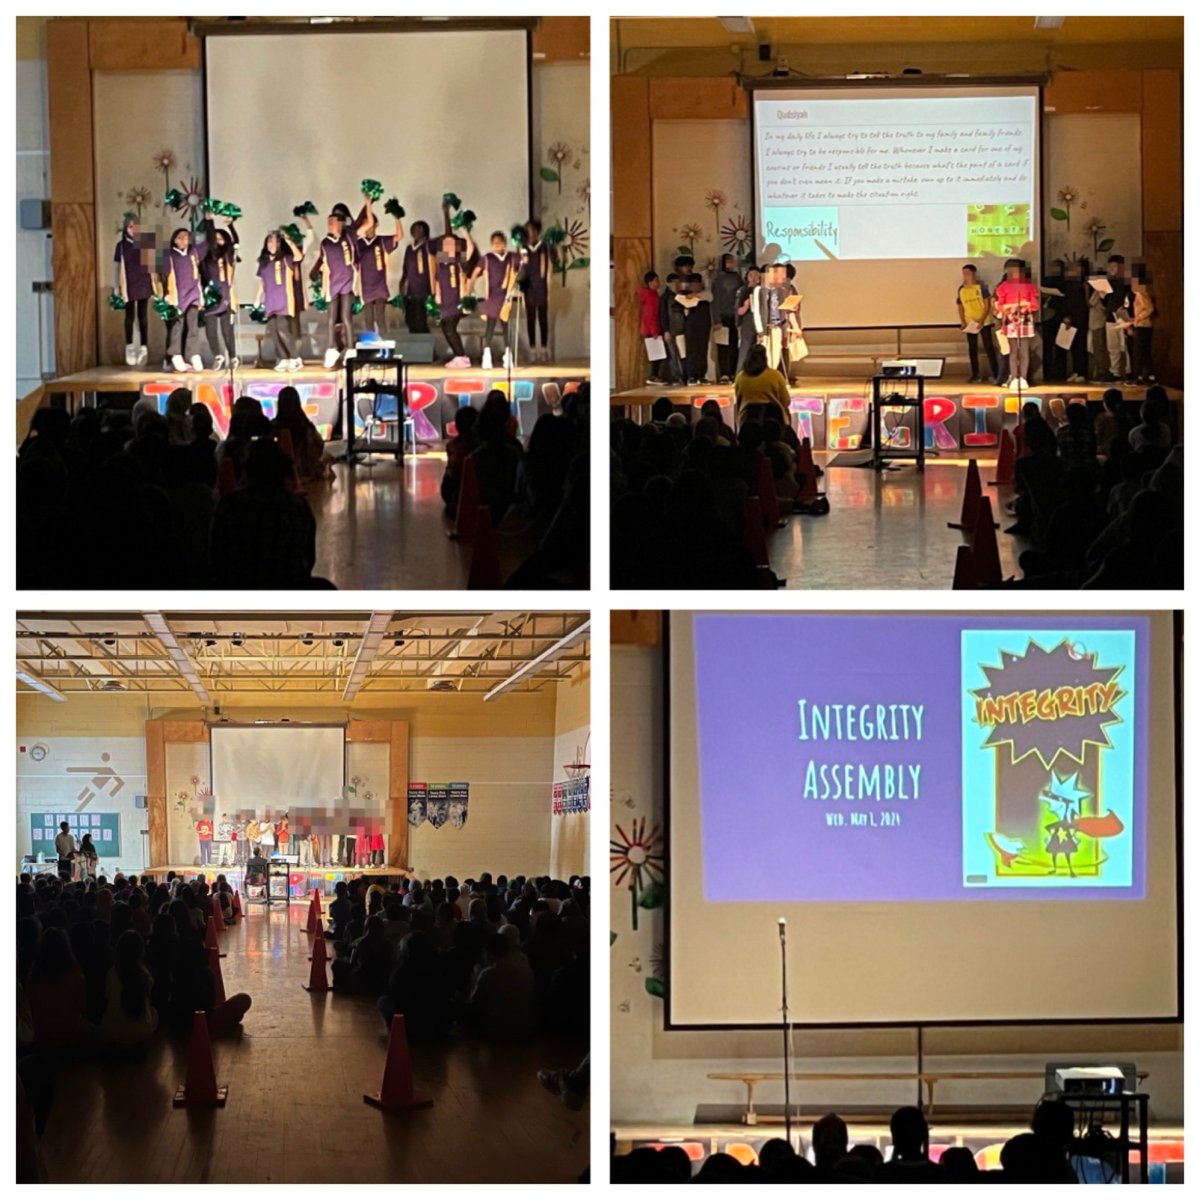 Integrity Character Assembly today! We learned about the quality of being honest and having good values. Amazing performances by the classes that kept everyone engaged! @tdsb @LN10Alvarez @LC2_TDSB